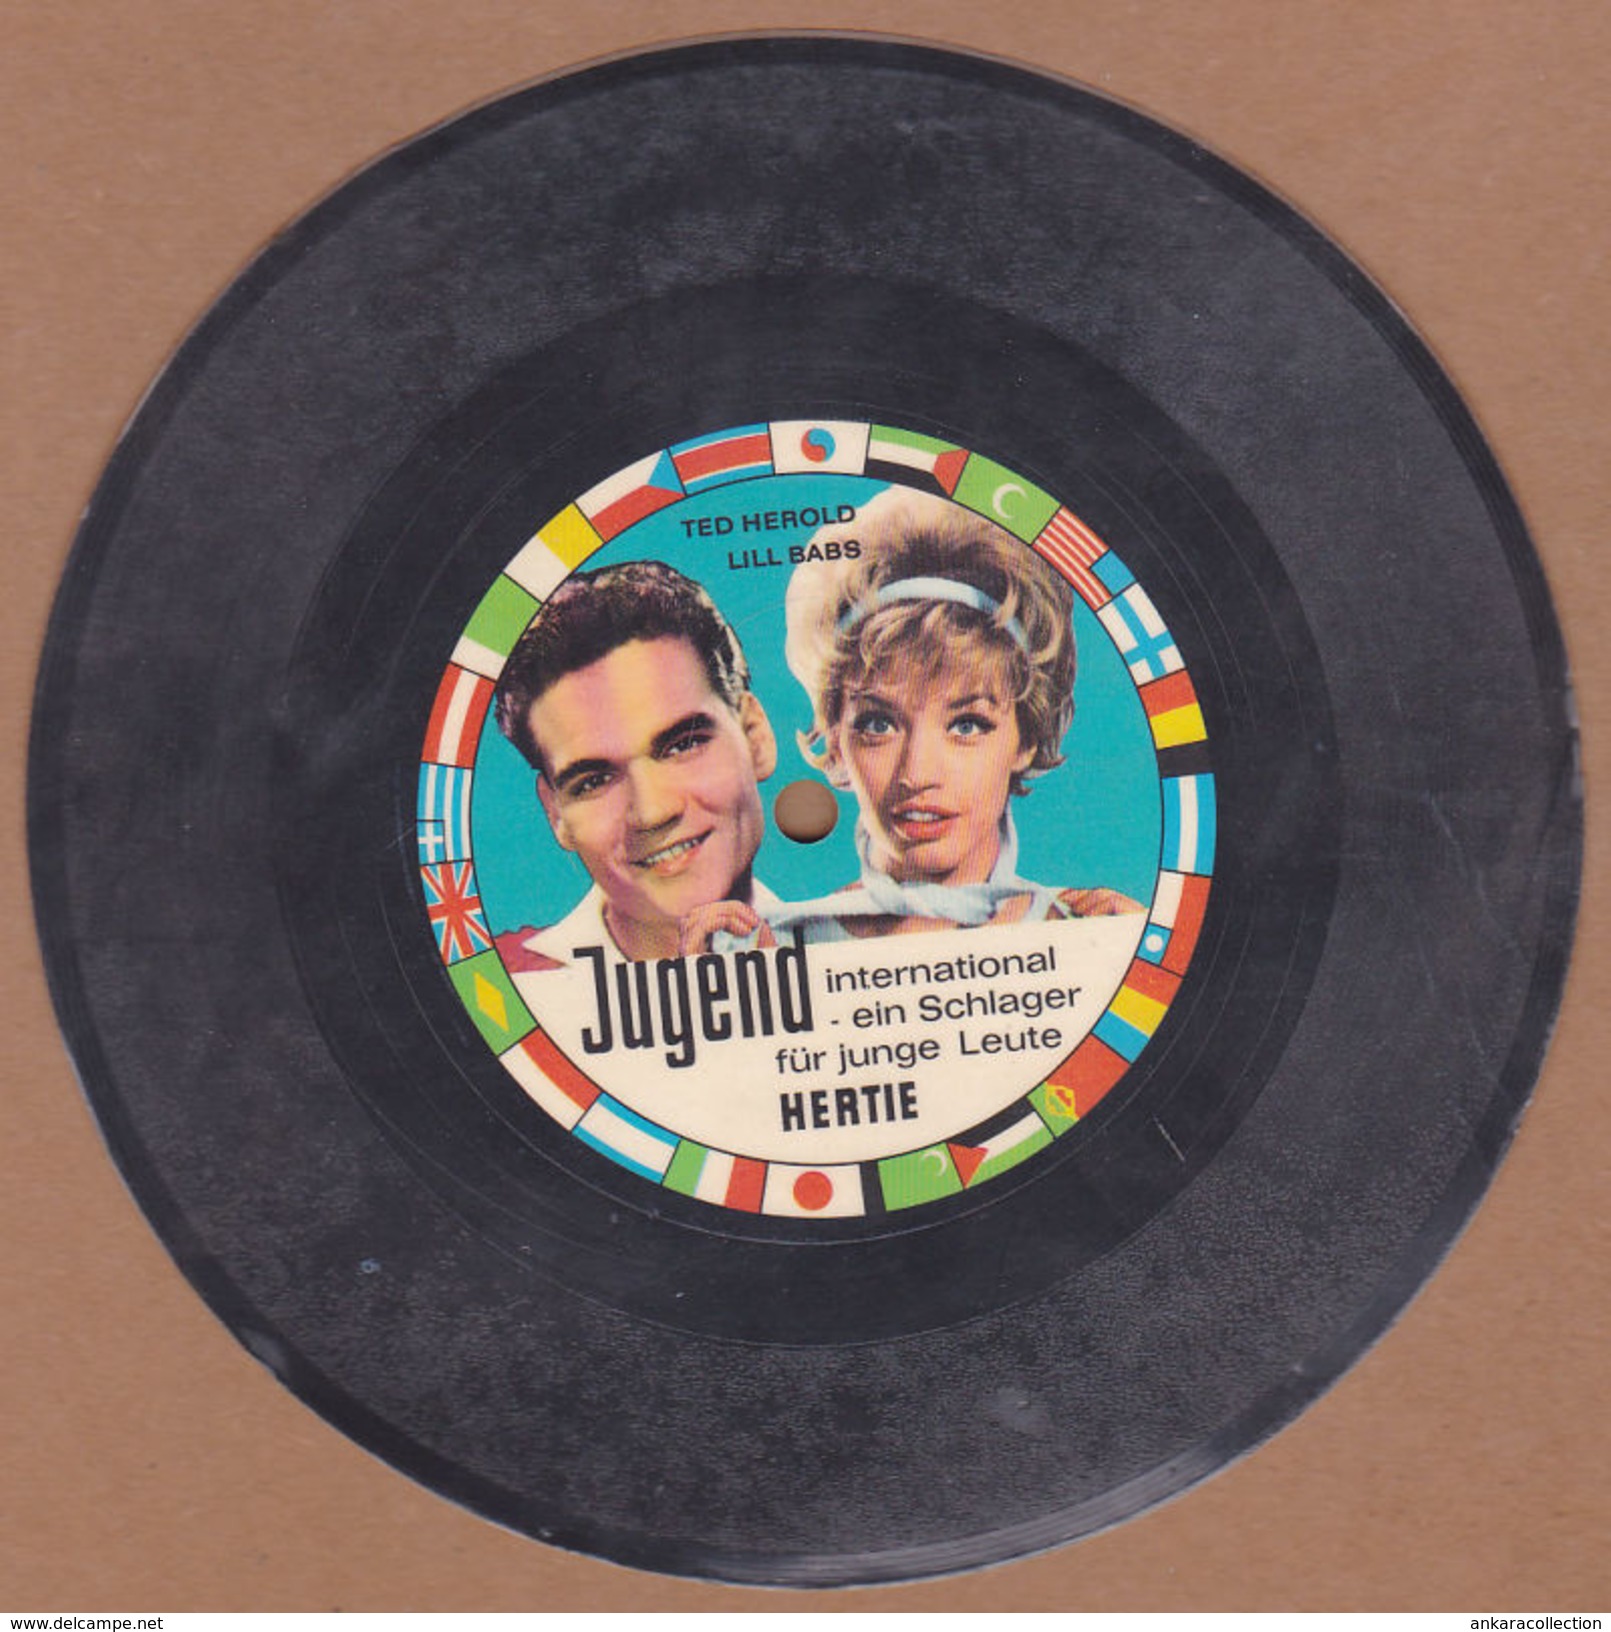 AC - 7" FLEXI DISC / TED HEROLD / LILL BABS / YOUTH A BEAT FOR YOUNG PEOPLE / HERTIE / FEHRING - Disco, Pop